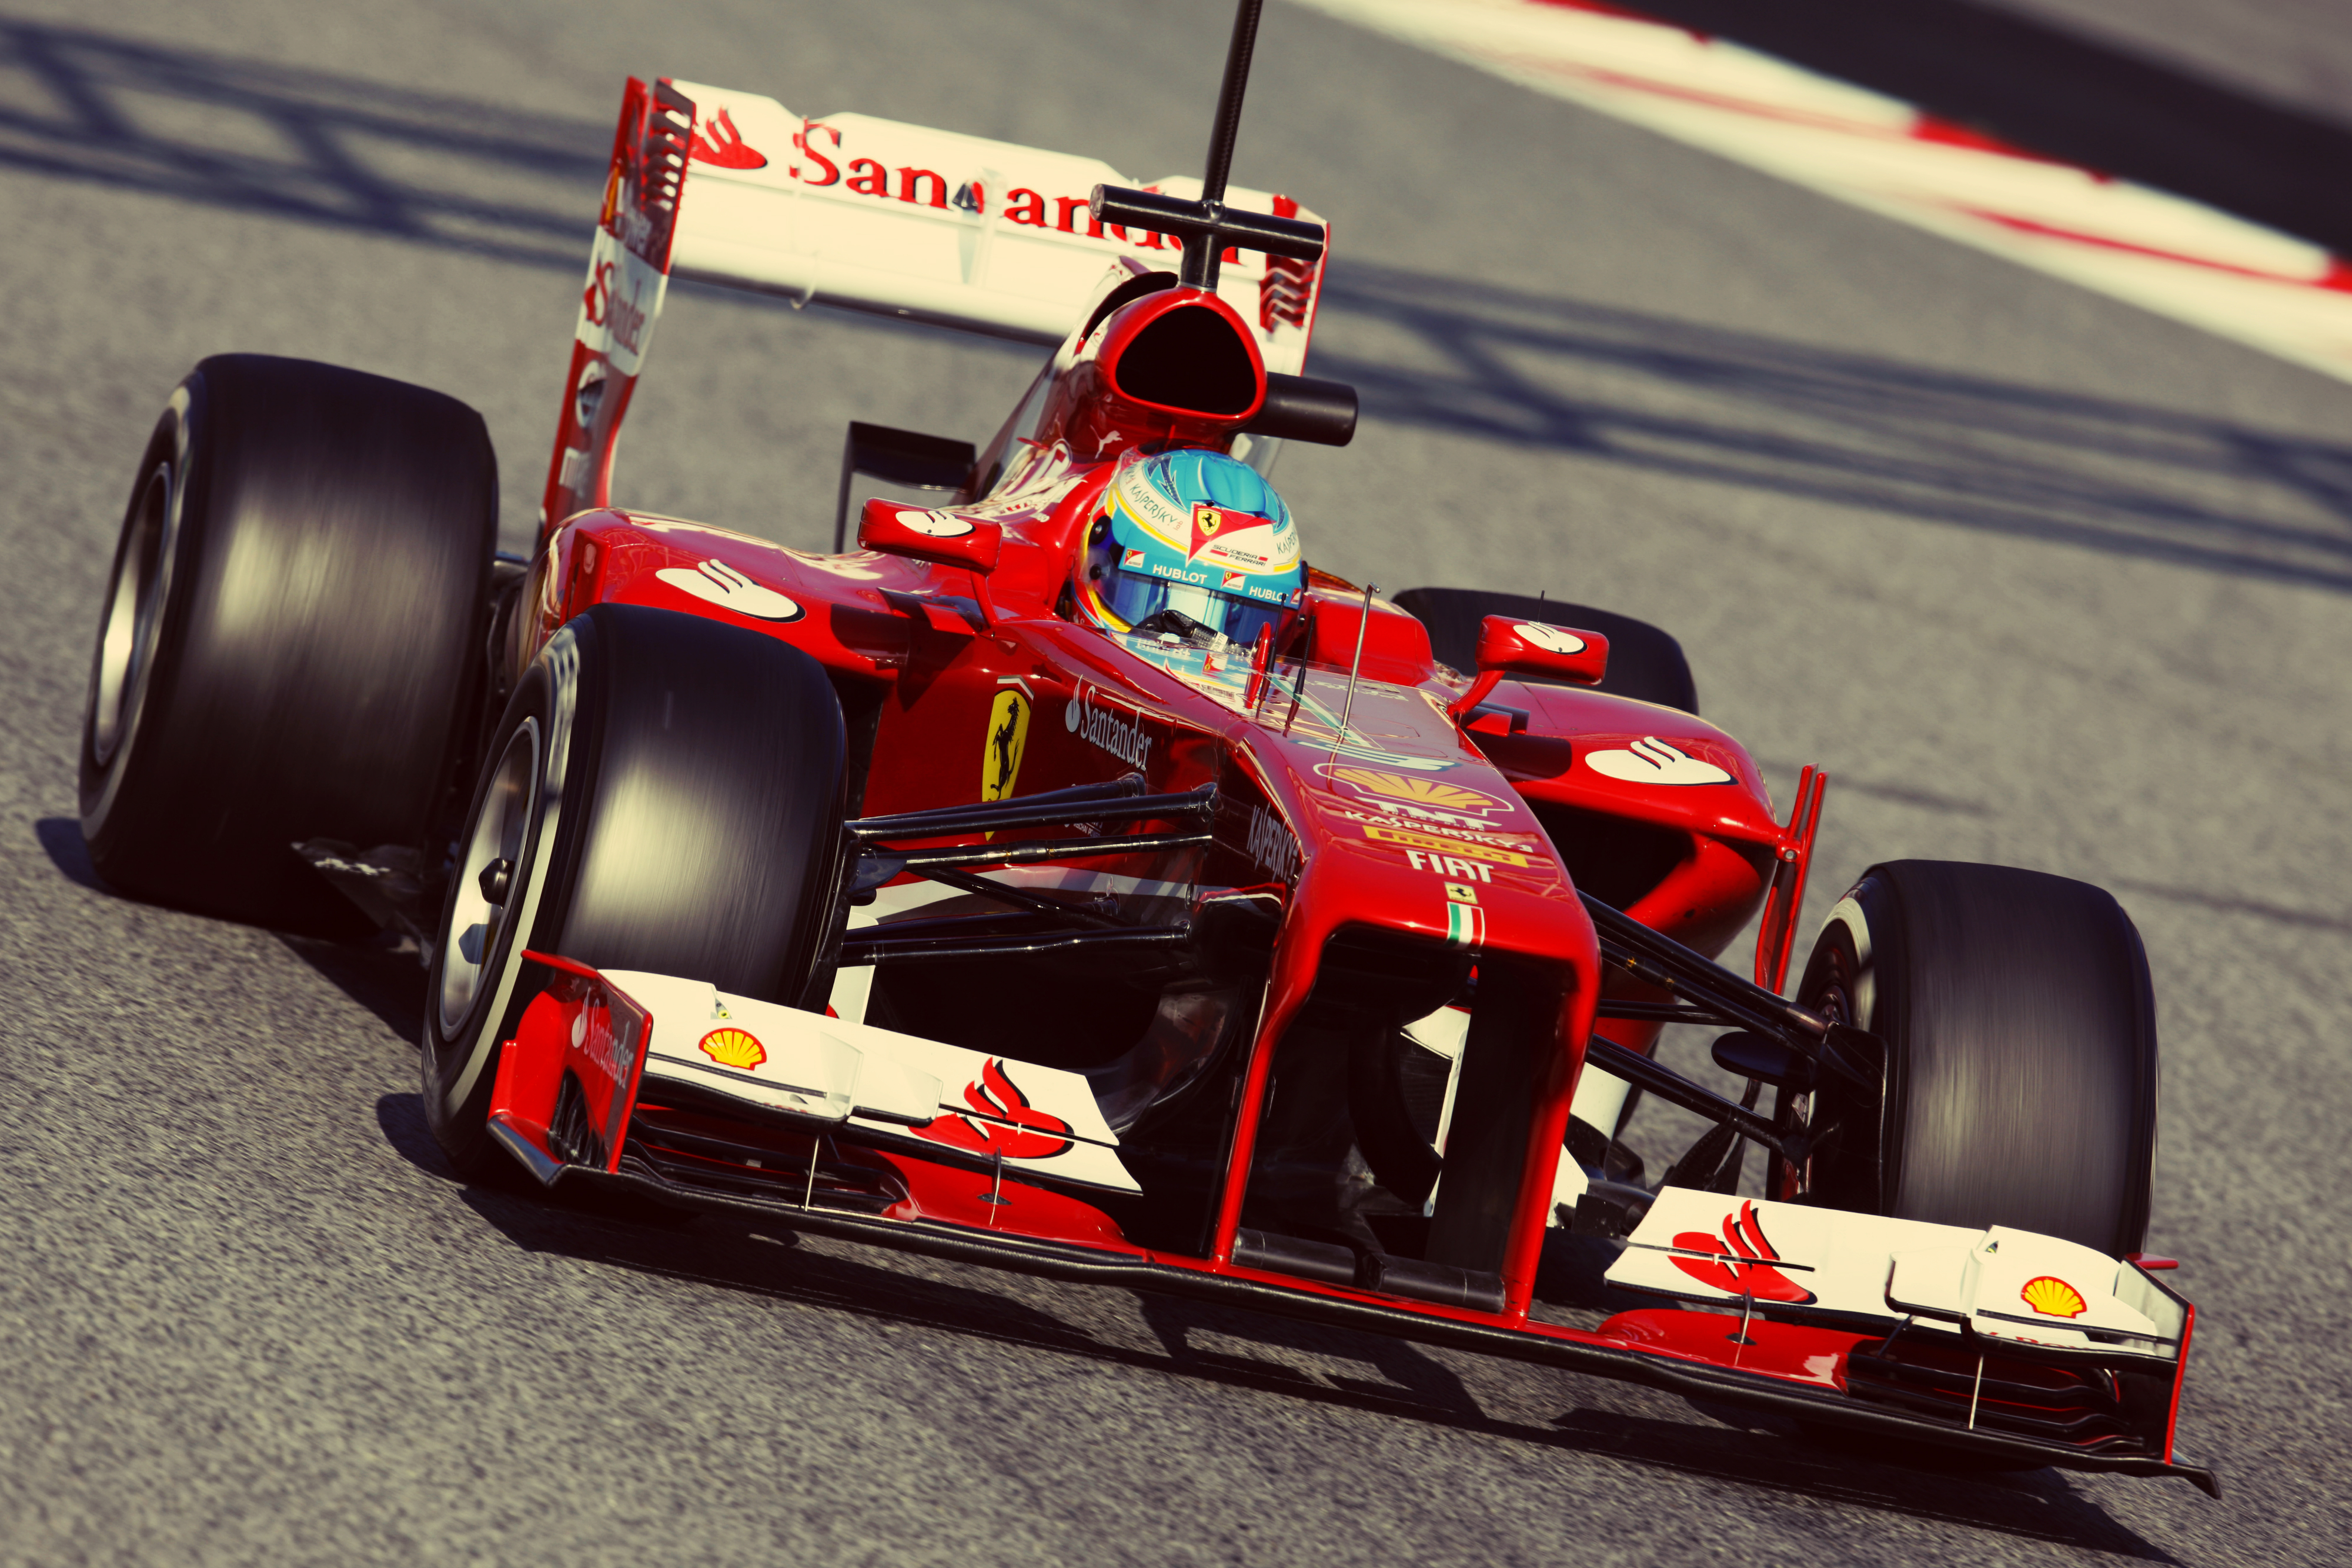 Wallpaper for mobile devices alonso, formula 1, formula one, sports